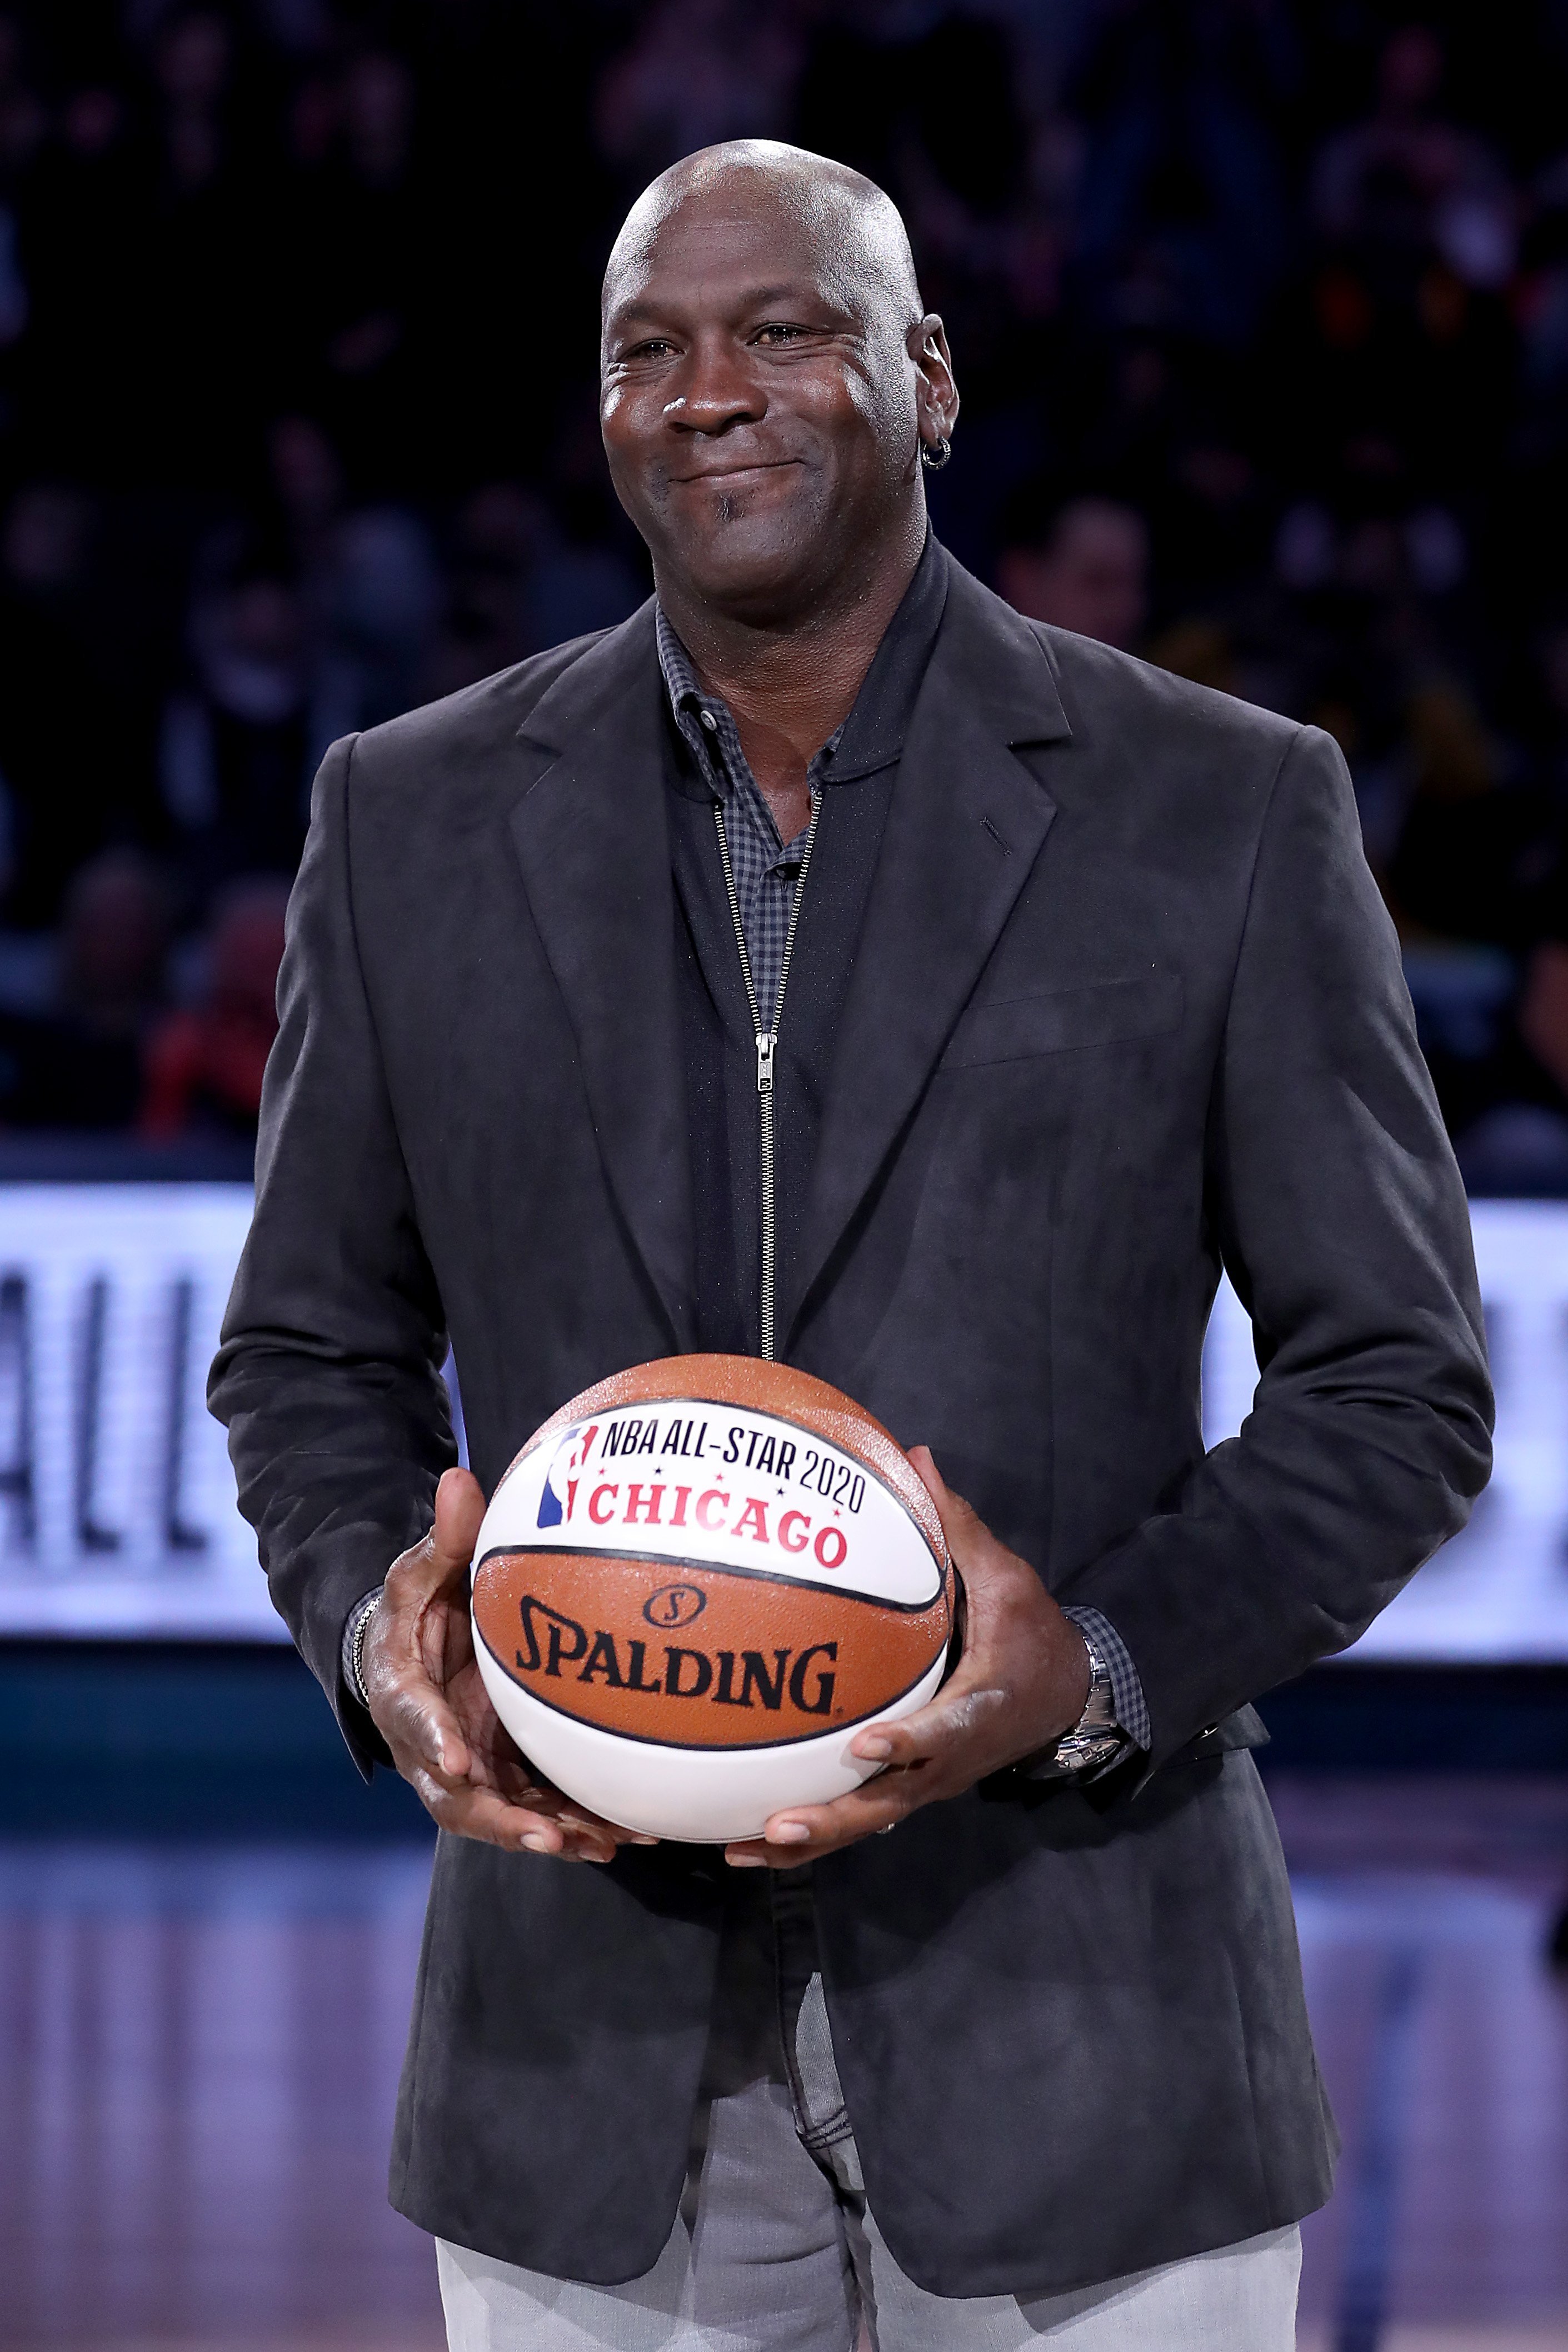 Michael Jordan takes part in a ceremony honoring the 2020 NBA All-Star game on Feb. 17, 2019. | Photo: Getty Images